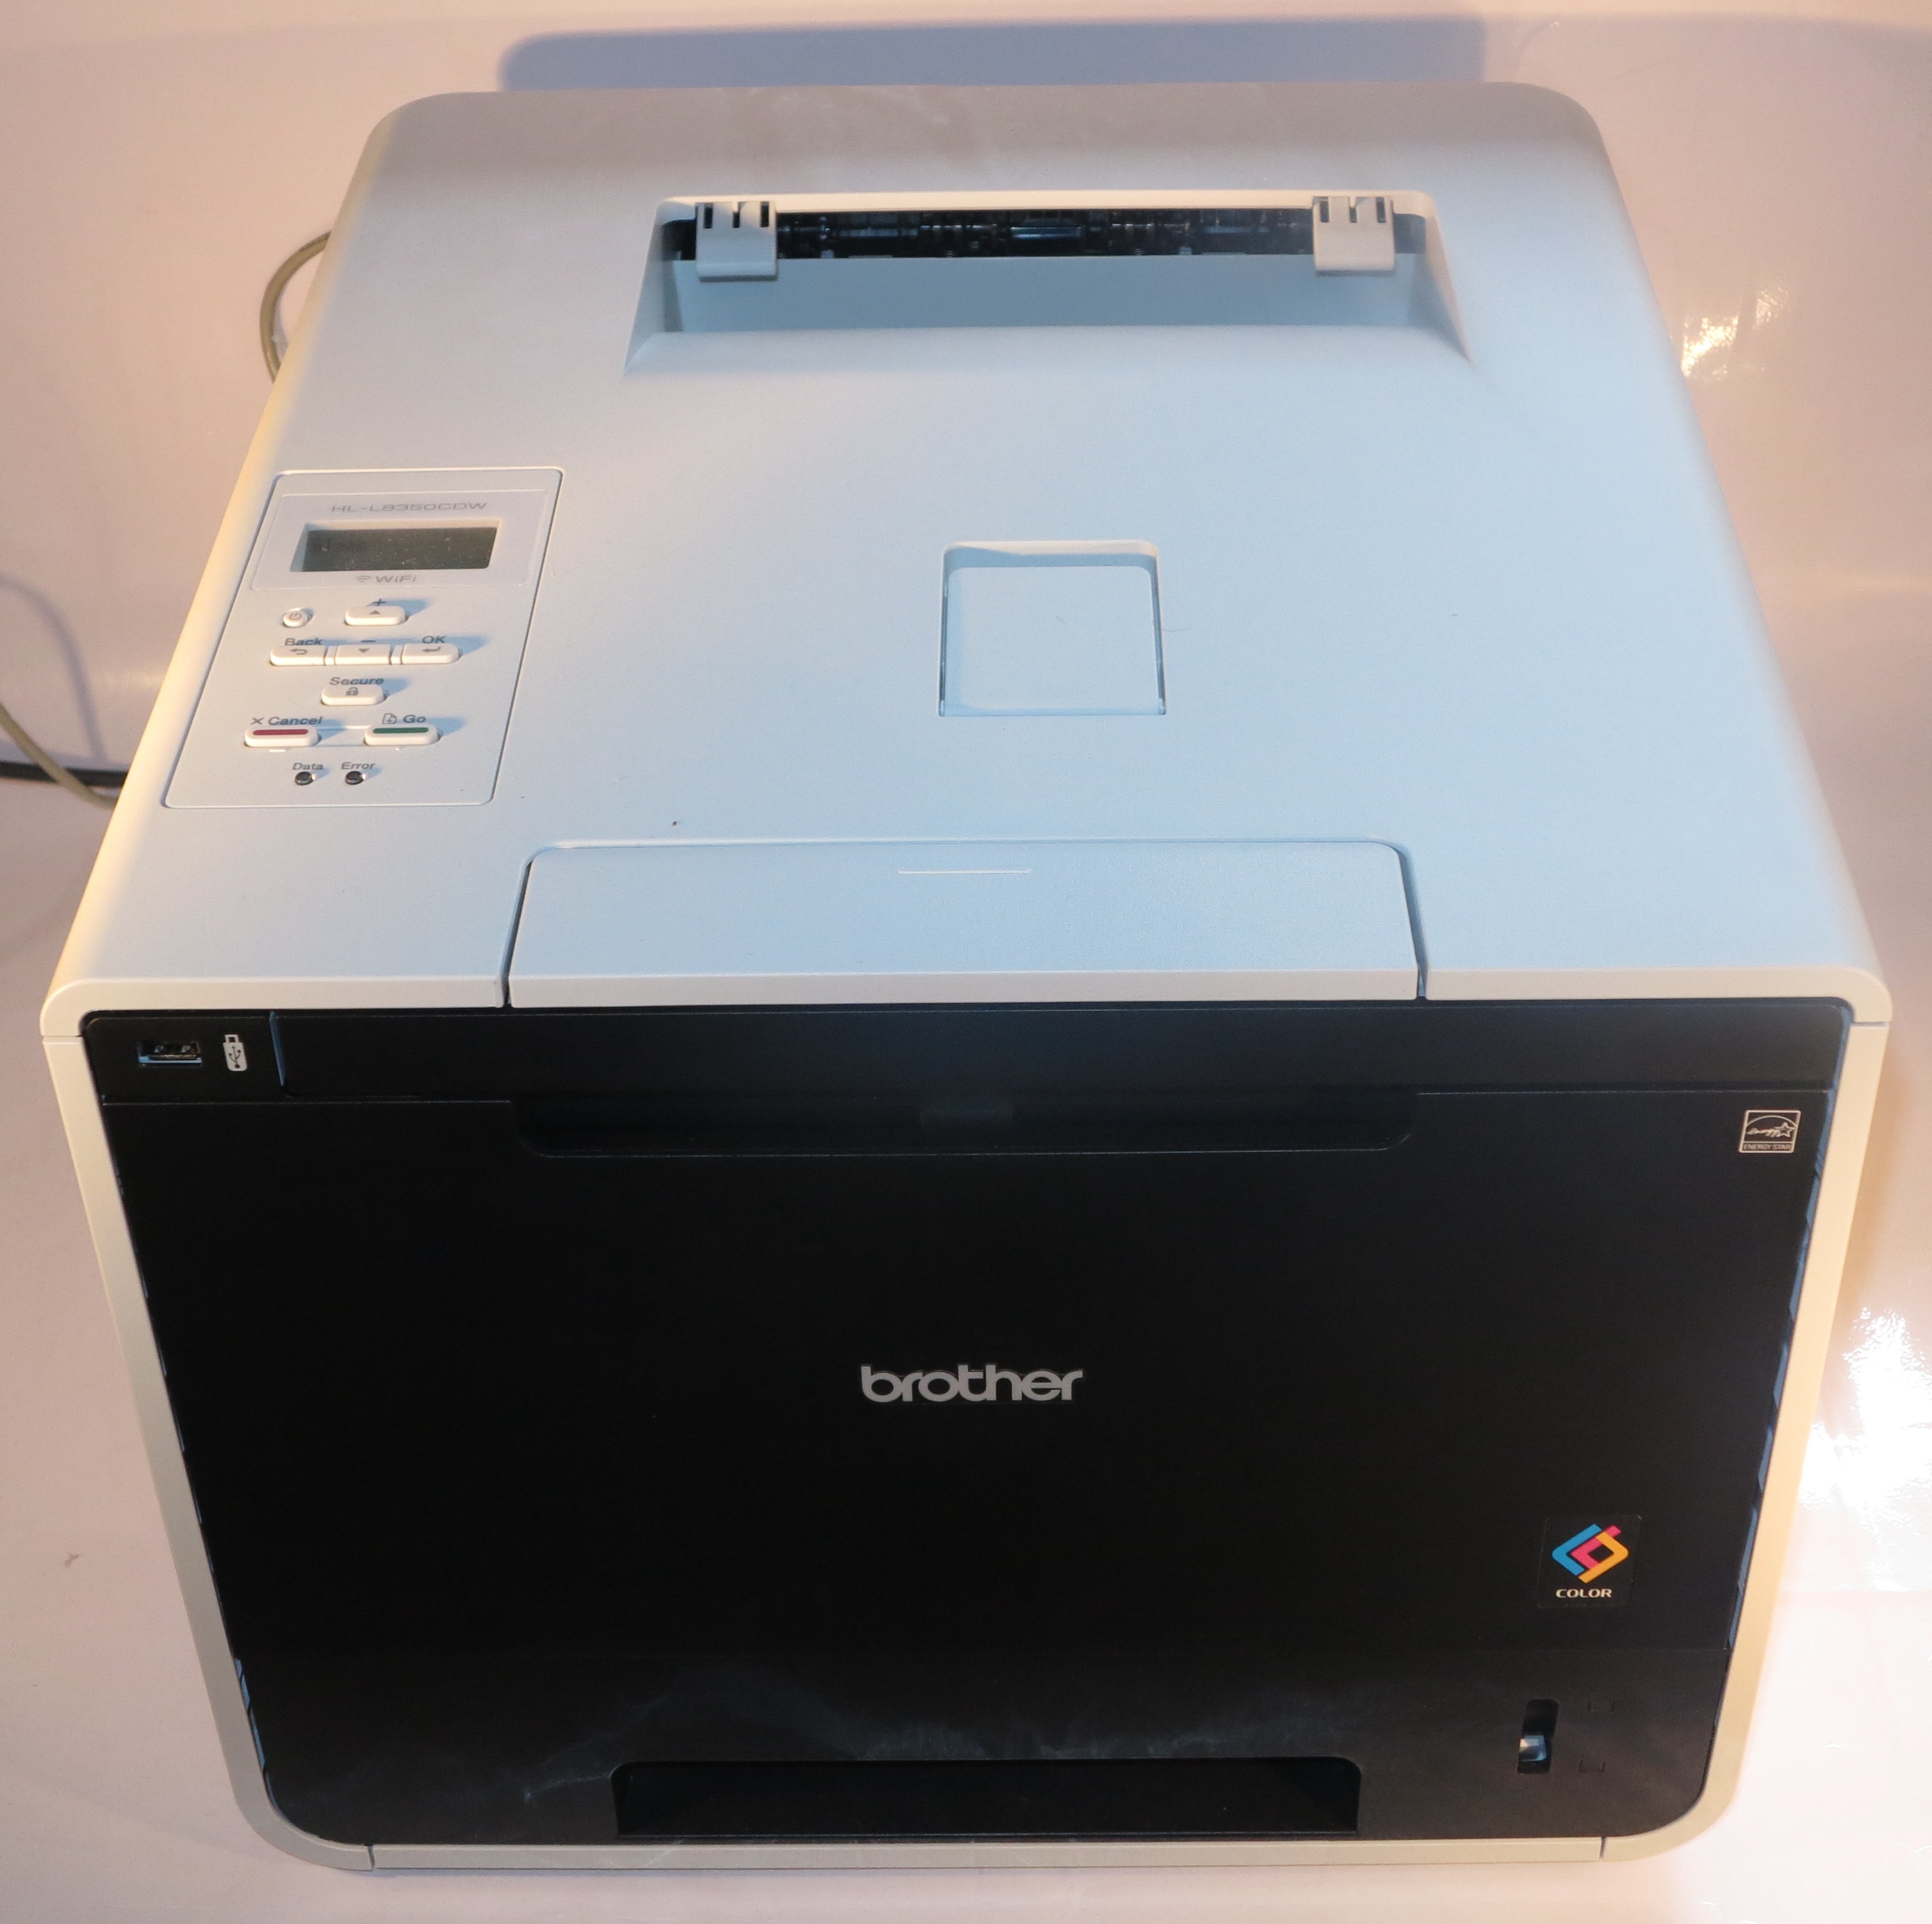 Product Review–Brother HL-L8350CDW colour laser printer